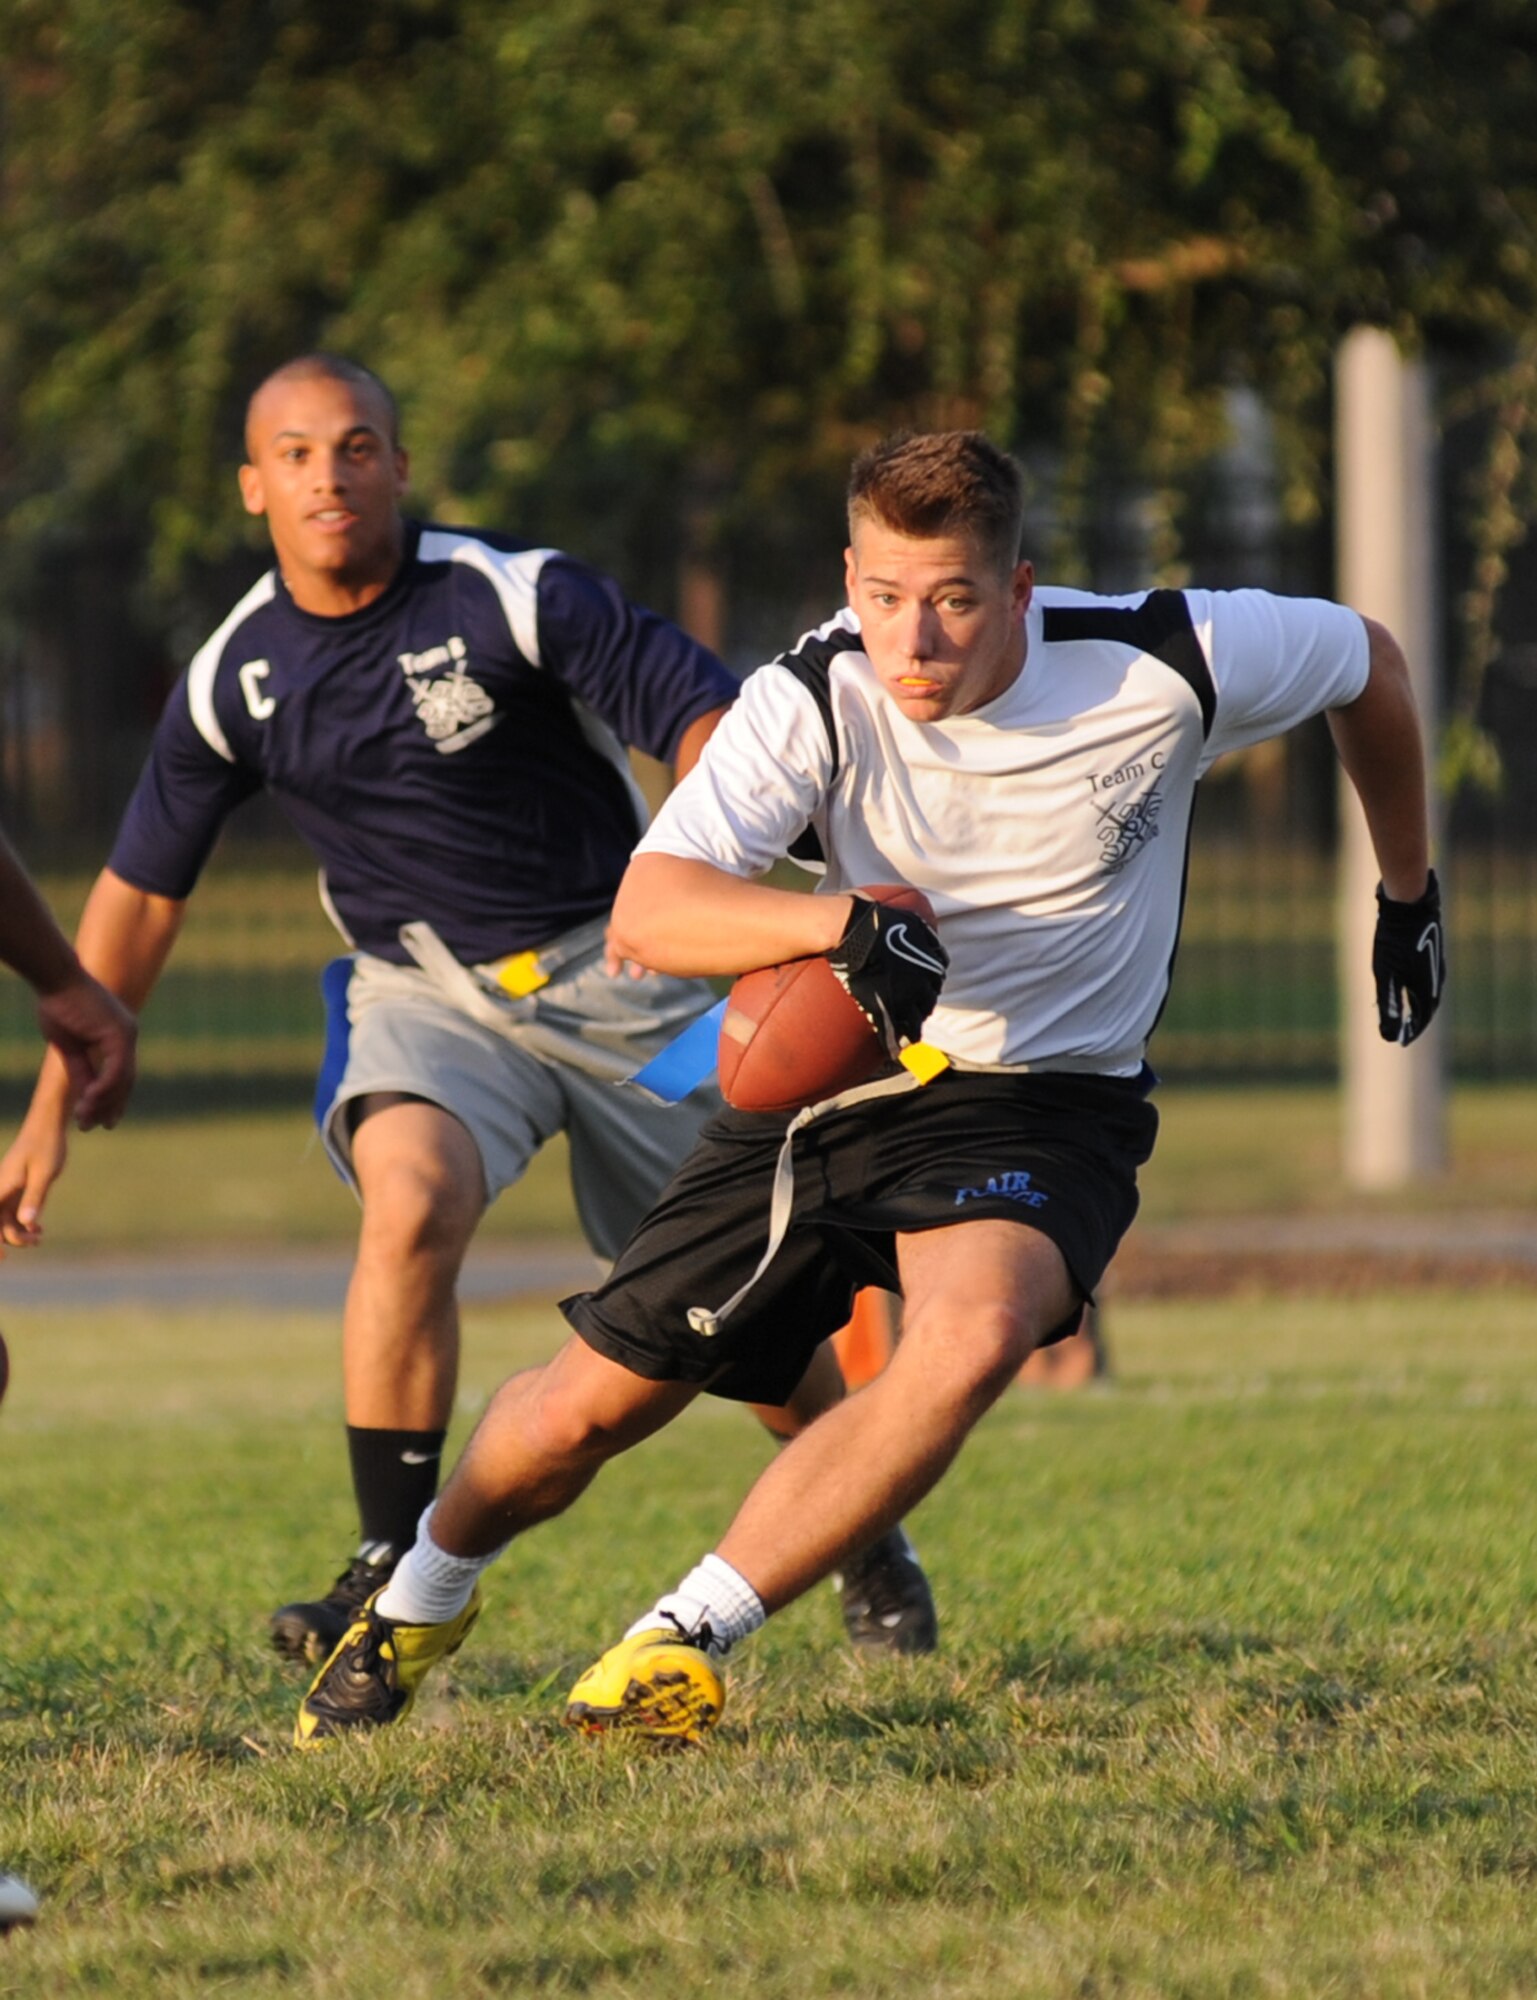 Sivad Pope, left, 338th Training Squadron-B team, is hot on the trail of Zachary Taylor, 338th TRS-C team, who runs across the field looking for an opening during a National Conference intramural flag football team Oct. 6 at Keesler Air Force Base, Miss. The 338th TRS-C posted a 12-6 victory.  (U.S. Air Force photo by Kemberly Groue)